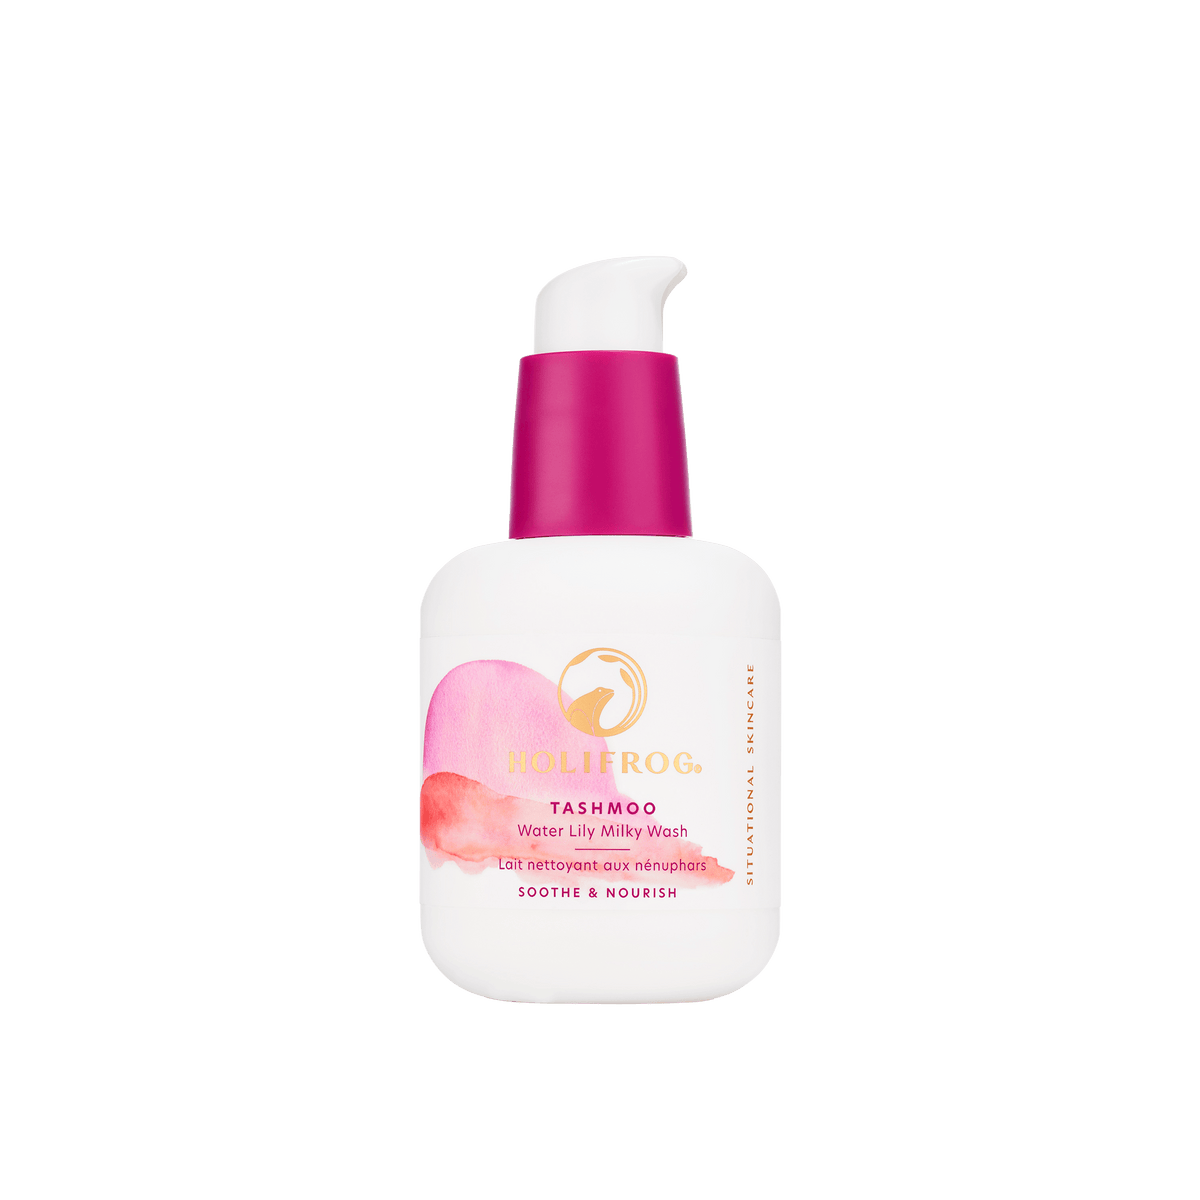 Tashmoo Water Lily Milky Cleanser